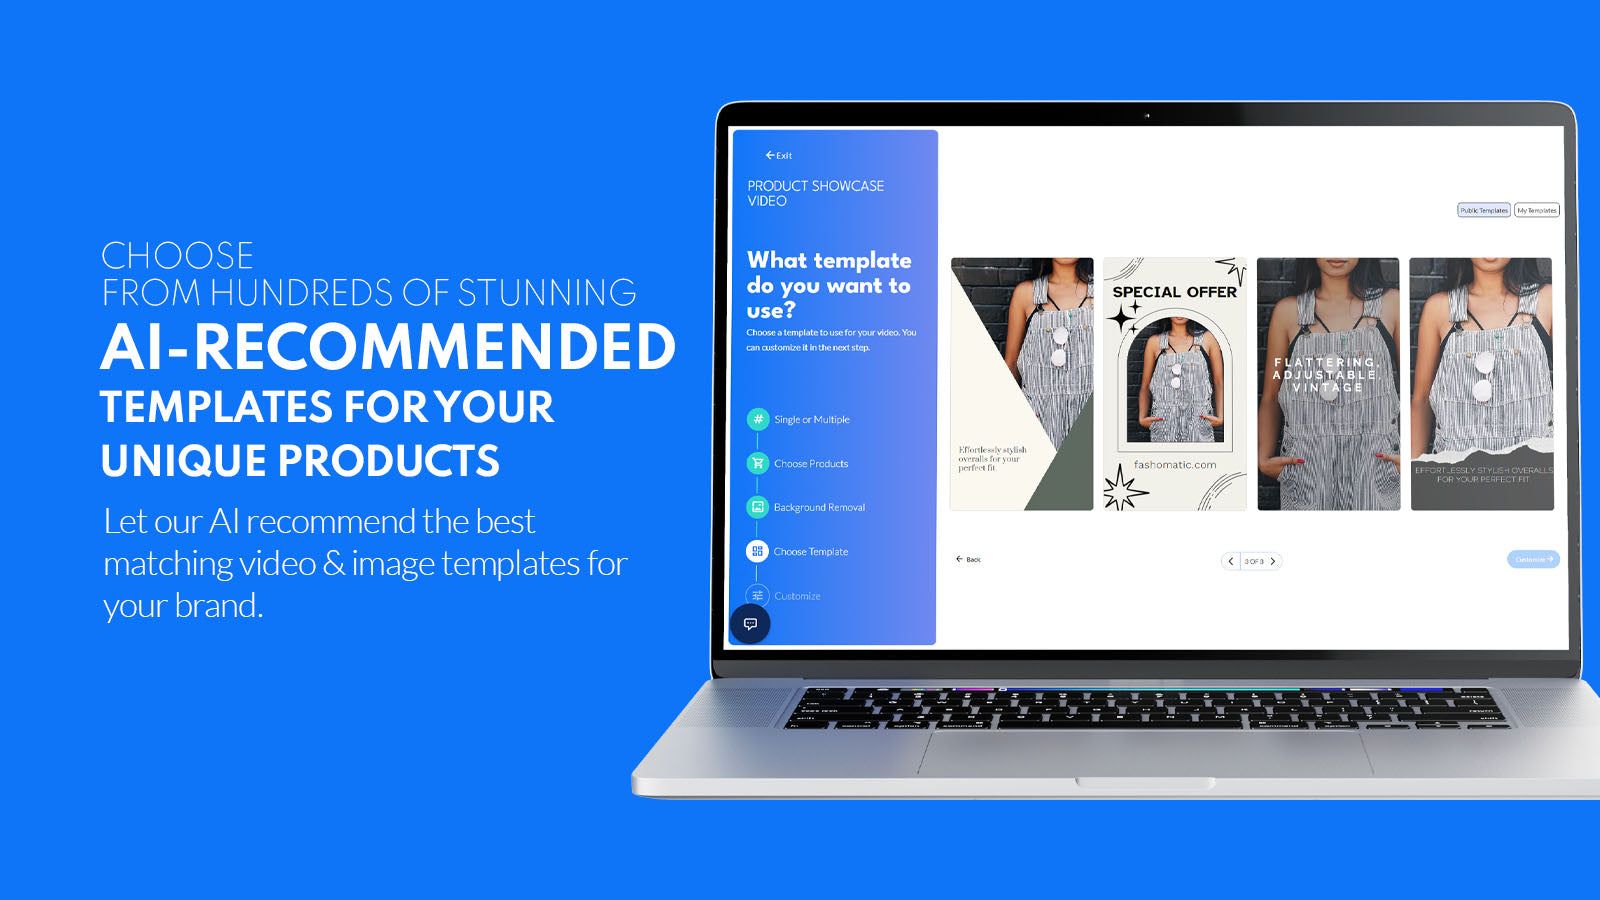 Hundreds of stunning AI-recommended templates for your products